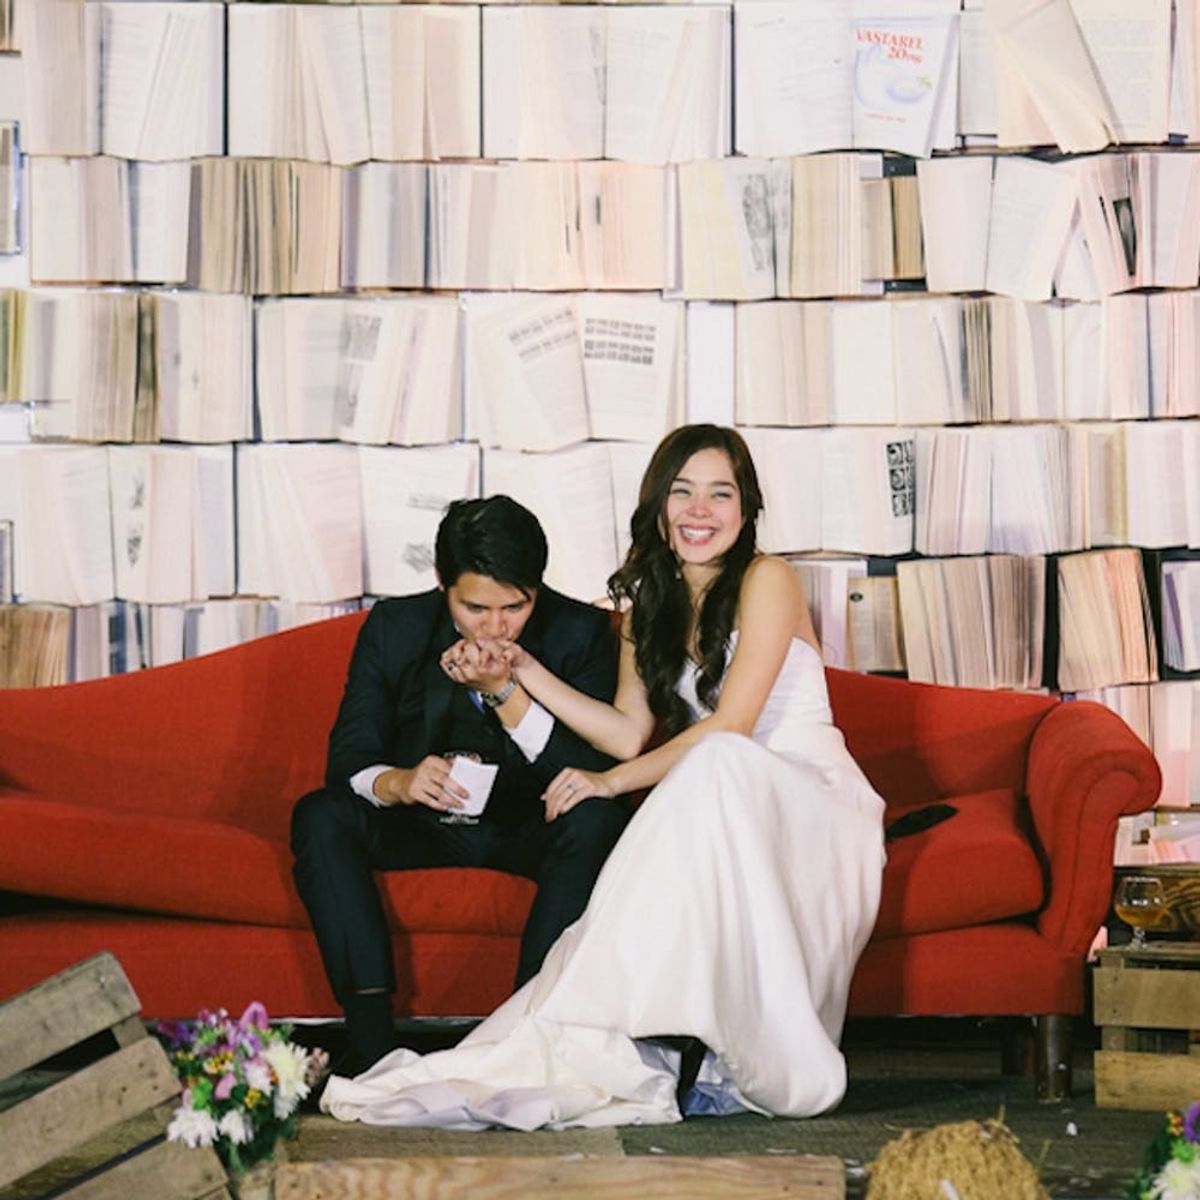 We’re Geeking Out Over This Chic Comic Book Wedding